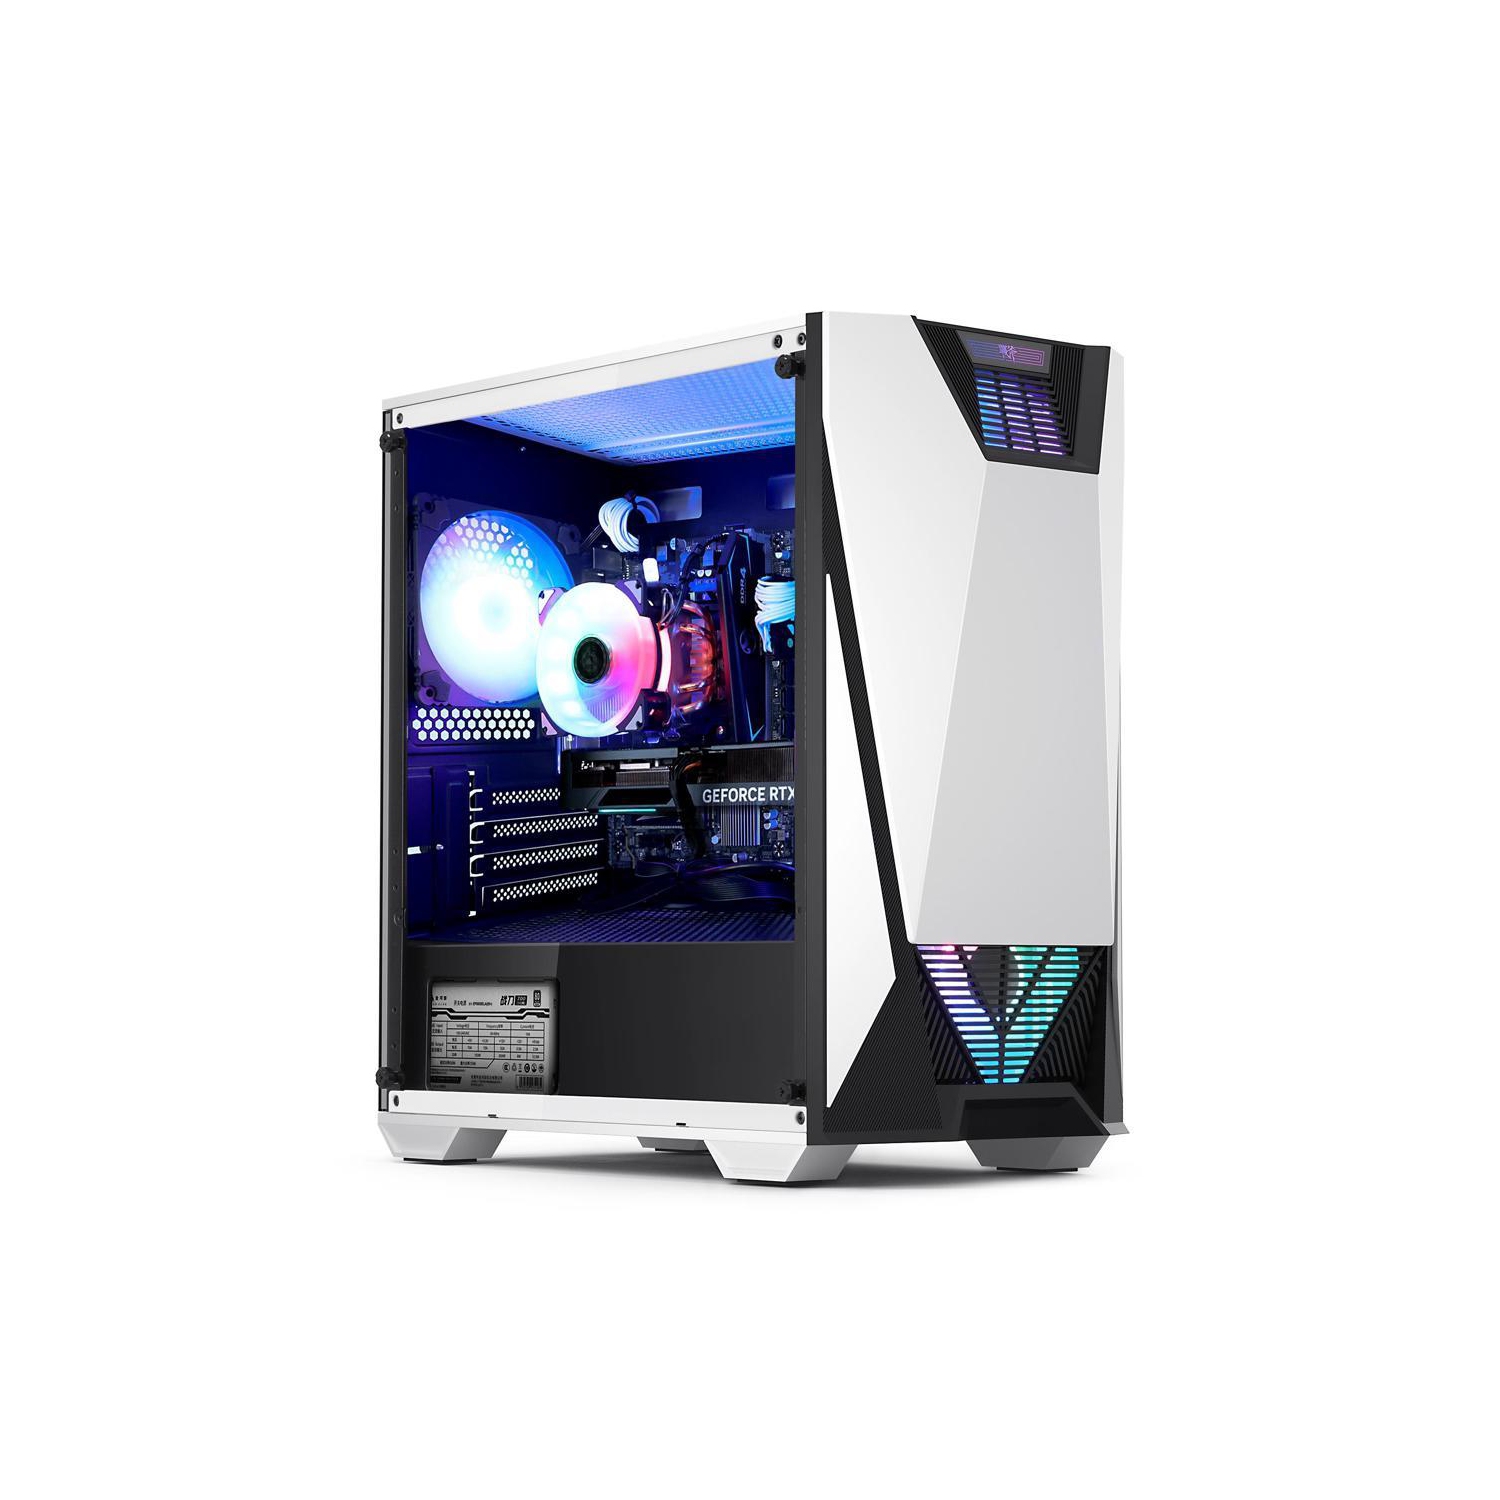 Hoengager Battleaxe Gaming - Intel Core i5-12600K 10-Core 3.7GHz-NVIDIA GeForce RTX 3060 - 16GB DDR4 3200MHz - 2TB +500GB M.2 NVMe SSD- WIFI -RGB Fans - Windows 11 Pro Computer